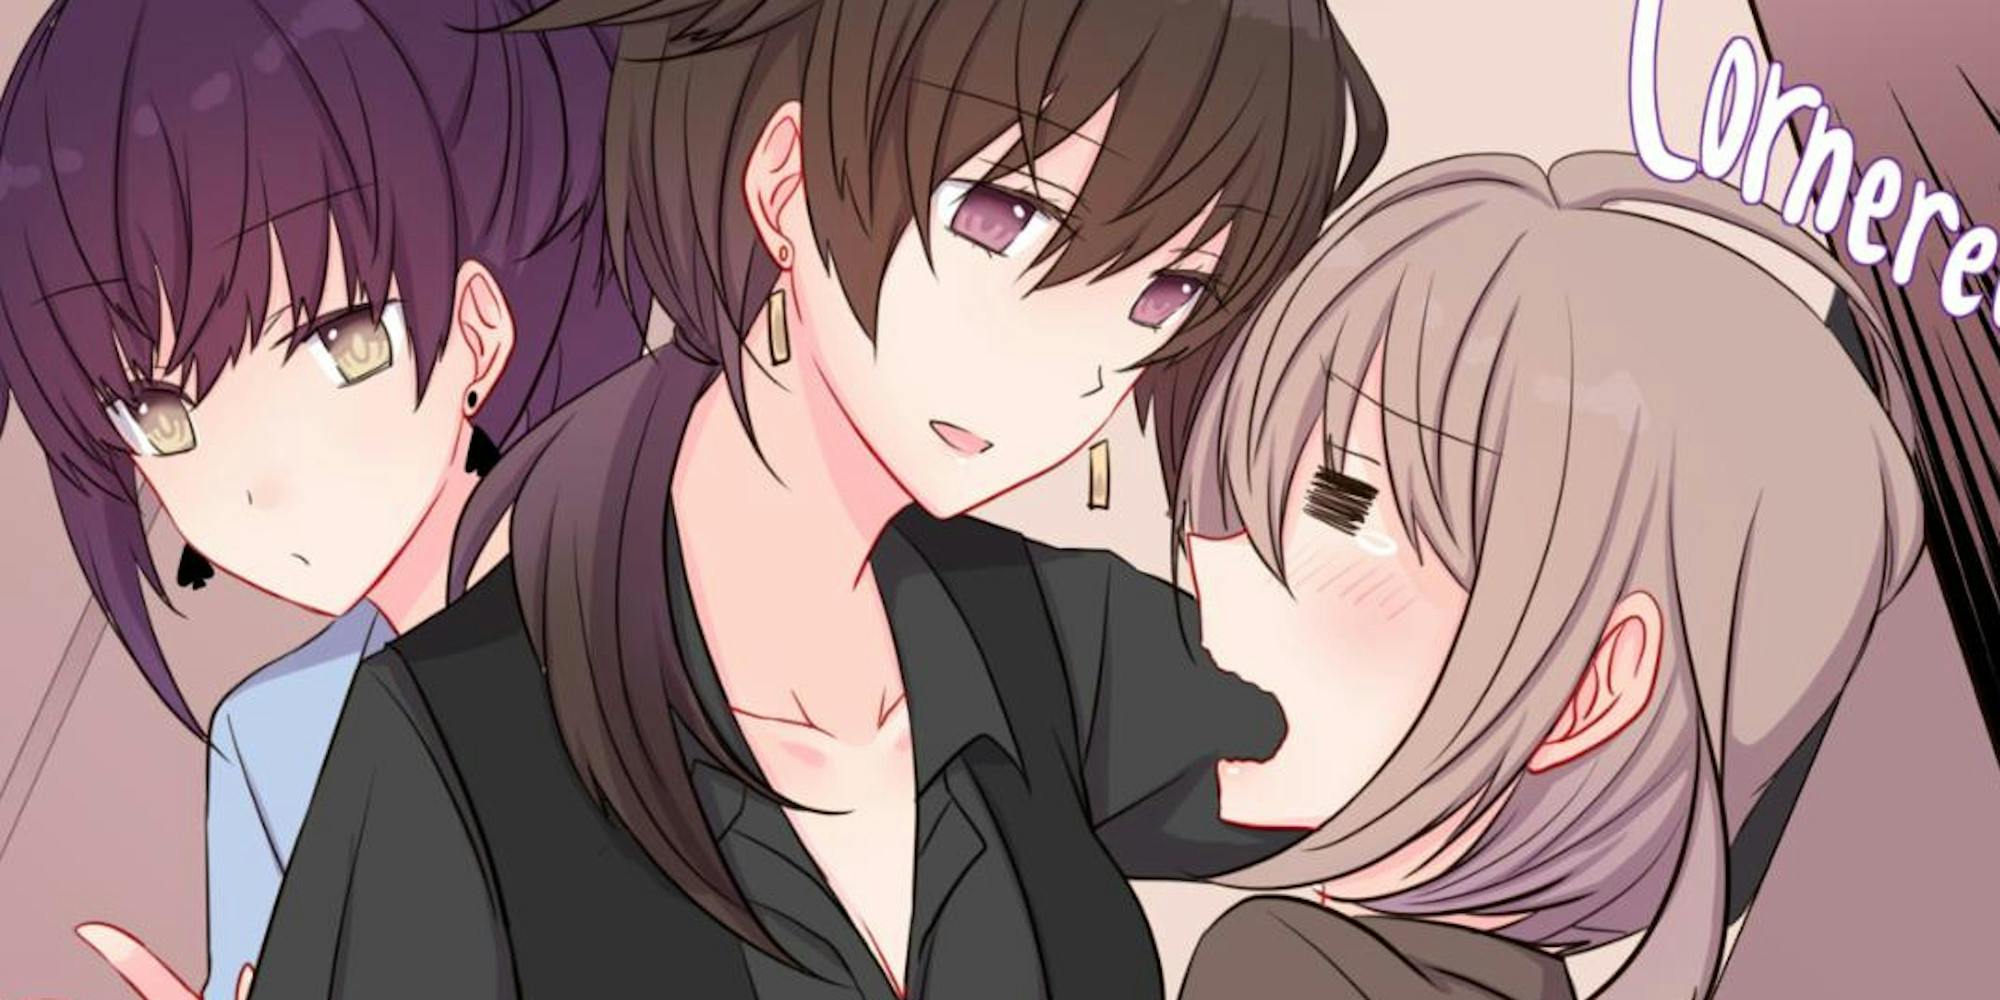 Looking for yuri? Here’s the best lesbian hentai online